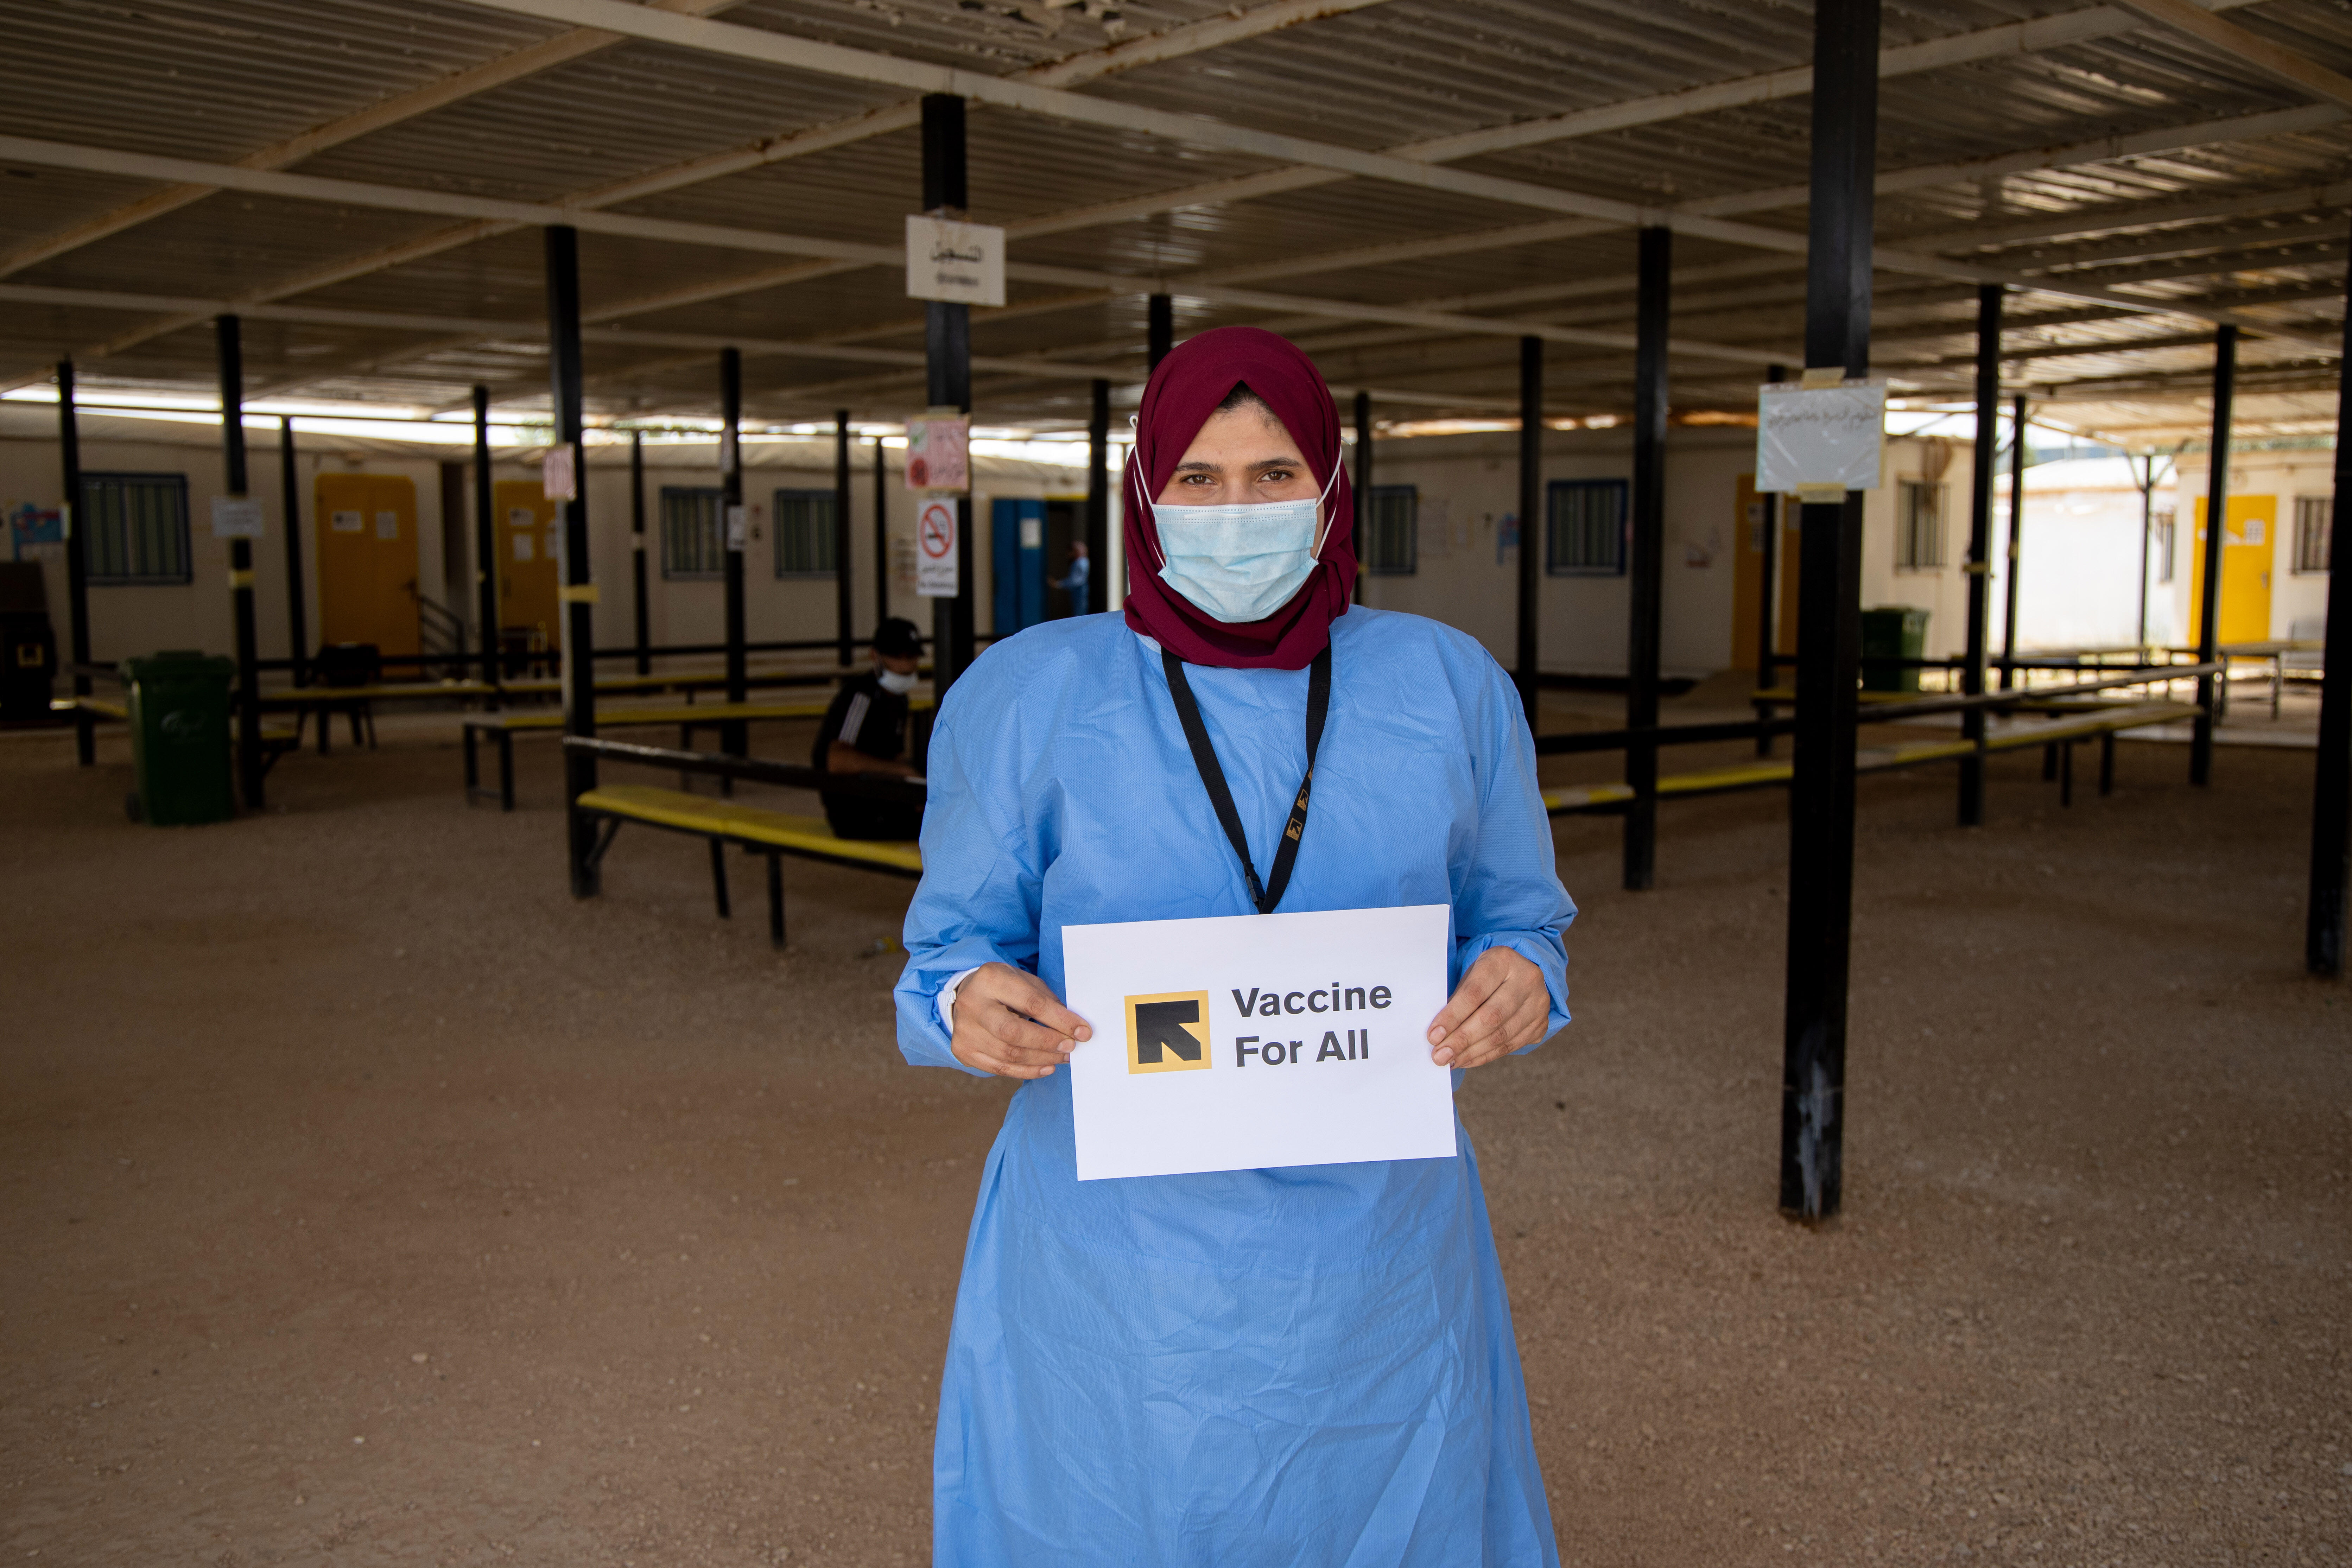 Hend Abu Dabour, an IRC nurse, holds up a sign saying Vaccine For All in the waiting area at the IRC's clinic in Zaatari refugee camp, Jordan